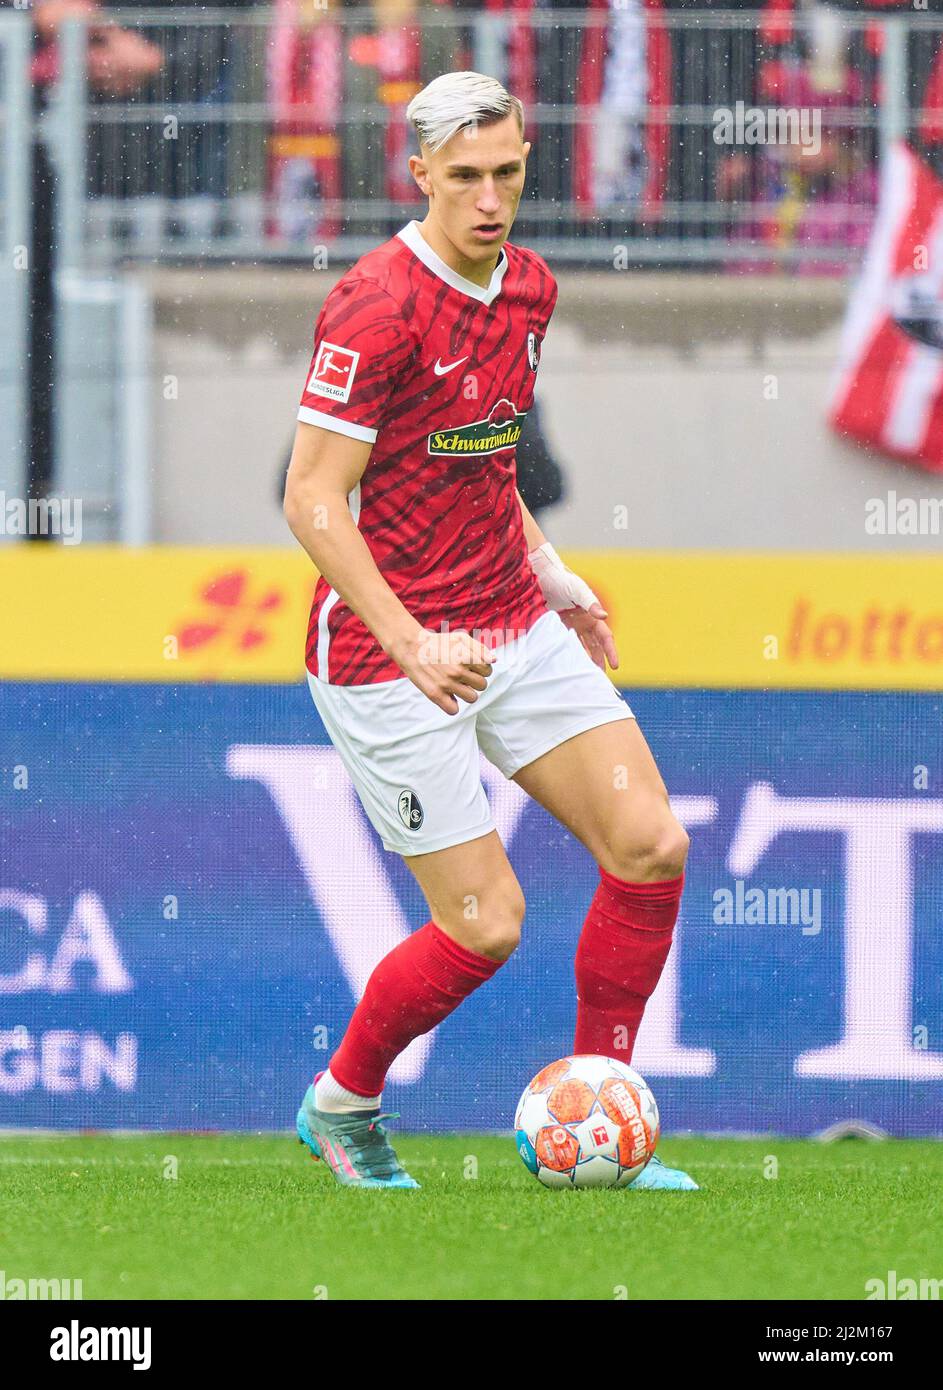 Freiburg, Germany. 02nd Apr, 2022. Nico Schlotterbeck, FRG 4  in the match SC FREIBURG - FC BAYERN MÜNCHEN 1-4 1.German Football League on April 2, 2022 in Freiburg, Germany. Season 2021/2022, matchday 28, 1.Bundesliga, FCB, München, 28.Spieltag. FCB, © Peter Schatz / Alamy Live News    - DFL REGULATIONS PROHIBIT ANY USE OF PHOTOGRAPHS as IMAGE SEQUENCES and/or QUASI-VIDEO - Credit: Peter Schatz/Alamy Live News Stock Photo